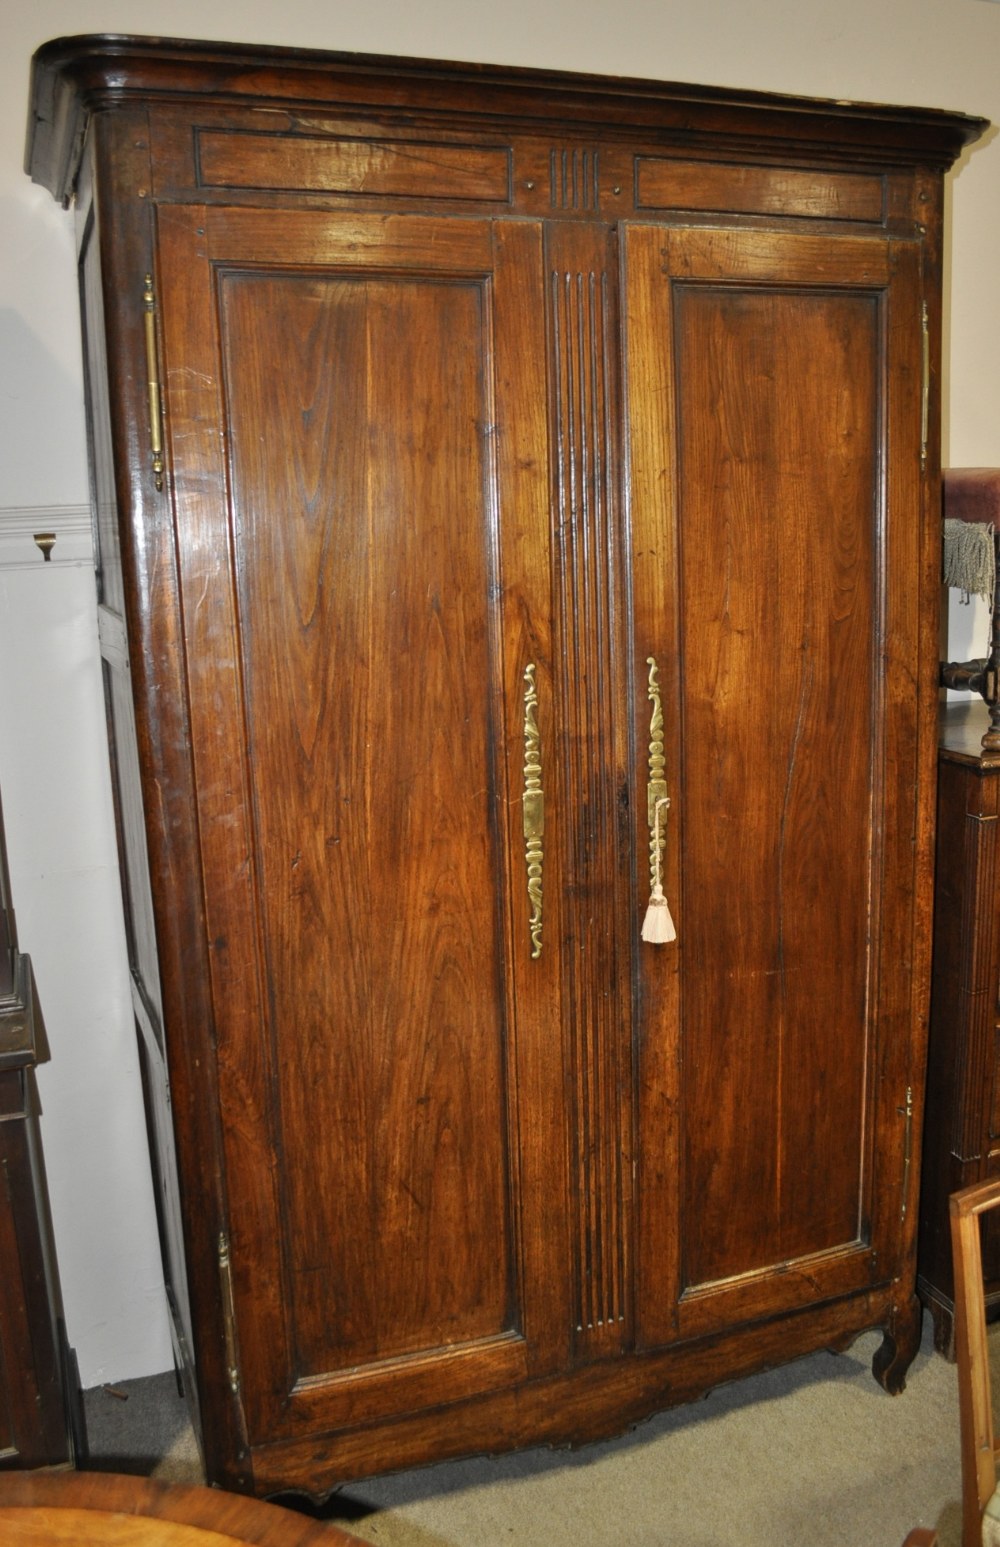 A 19th century Continental fruit wood 2-door armoire, width 54".